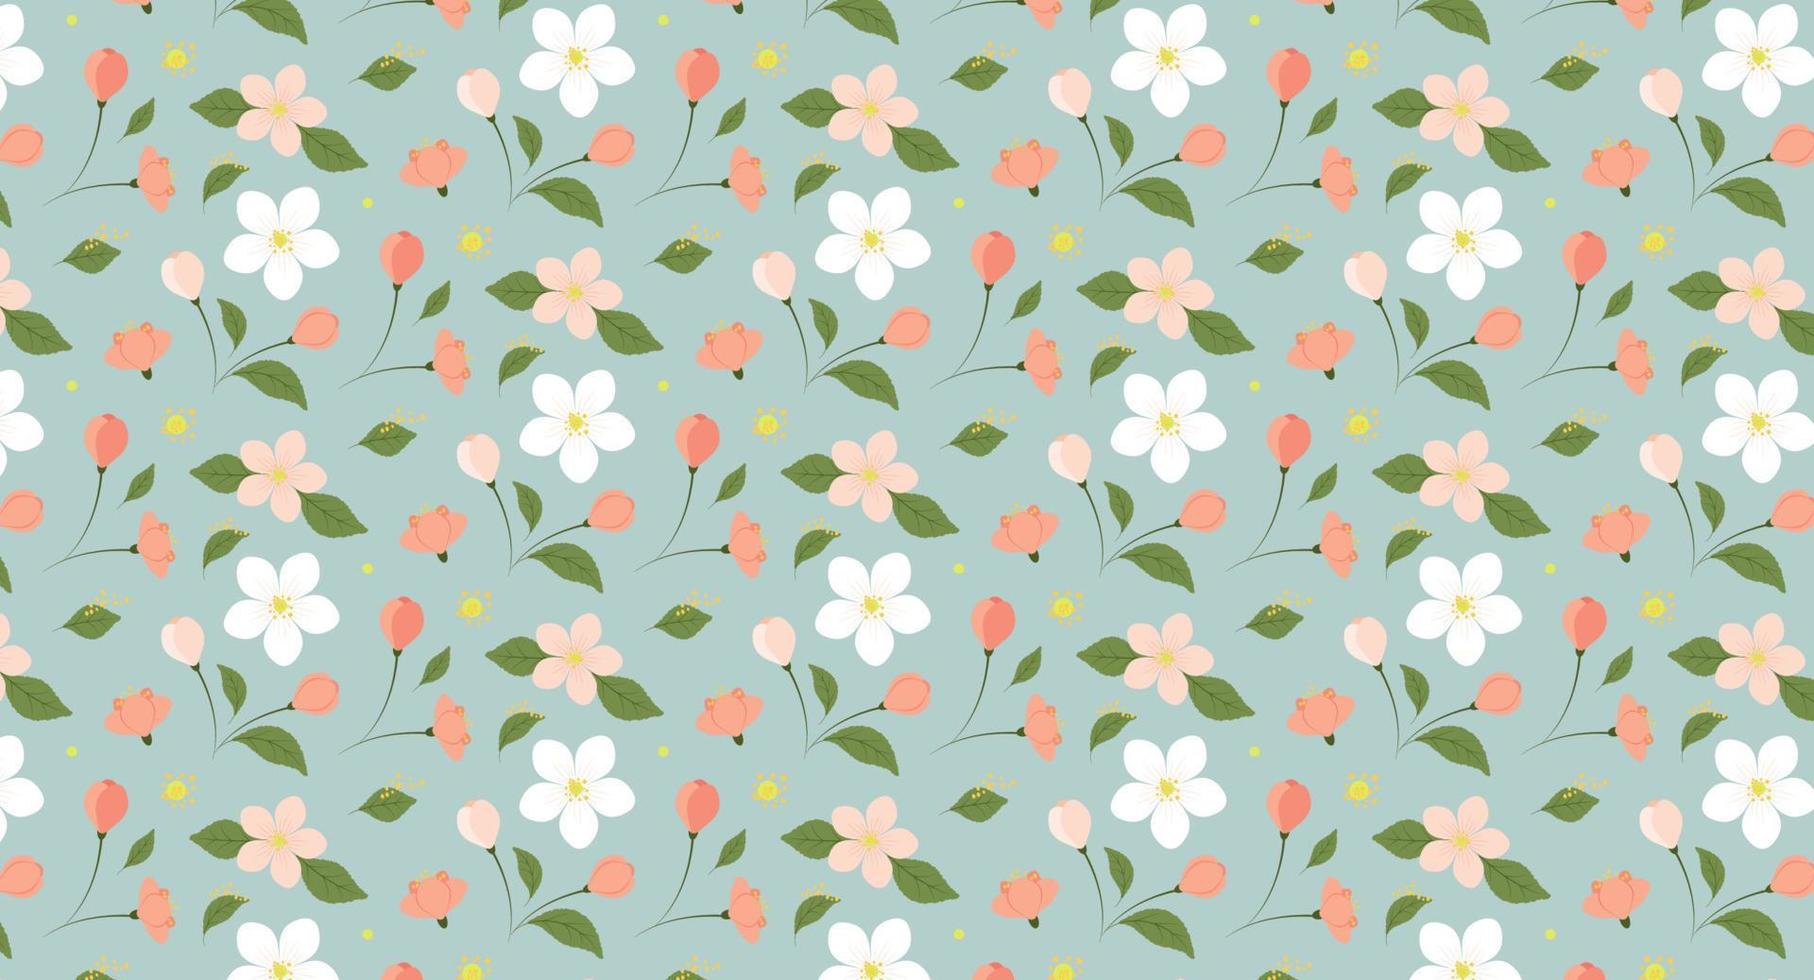 Seamless pattern with apple blossom flowers and leaves on a gray-blue background. vector